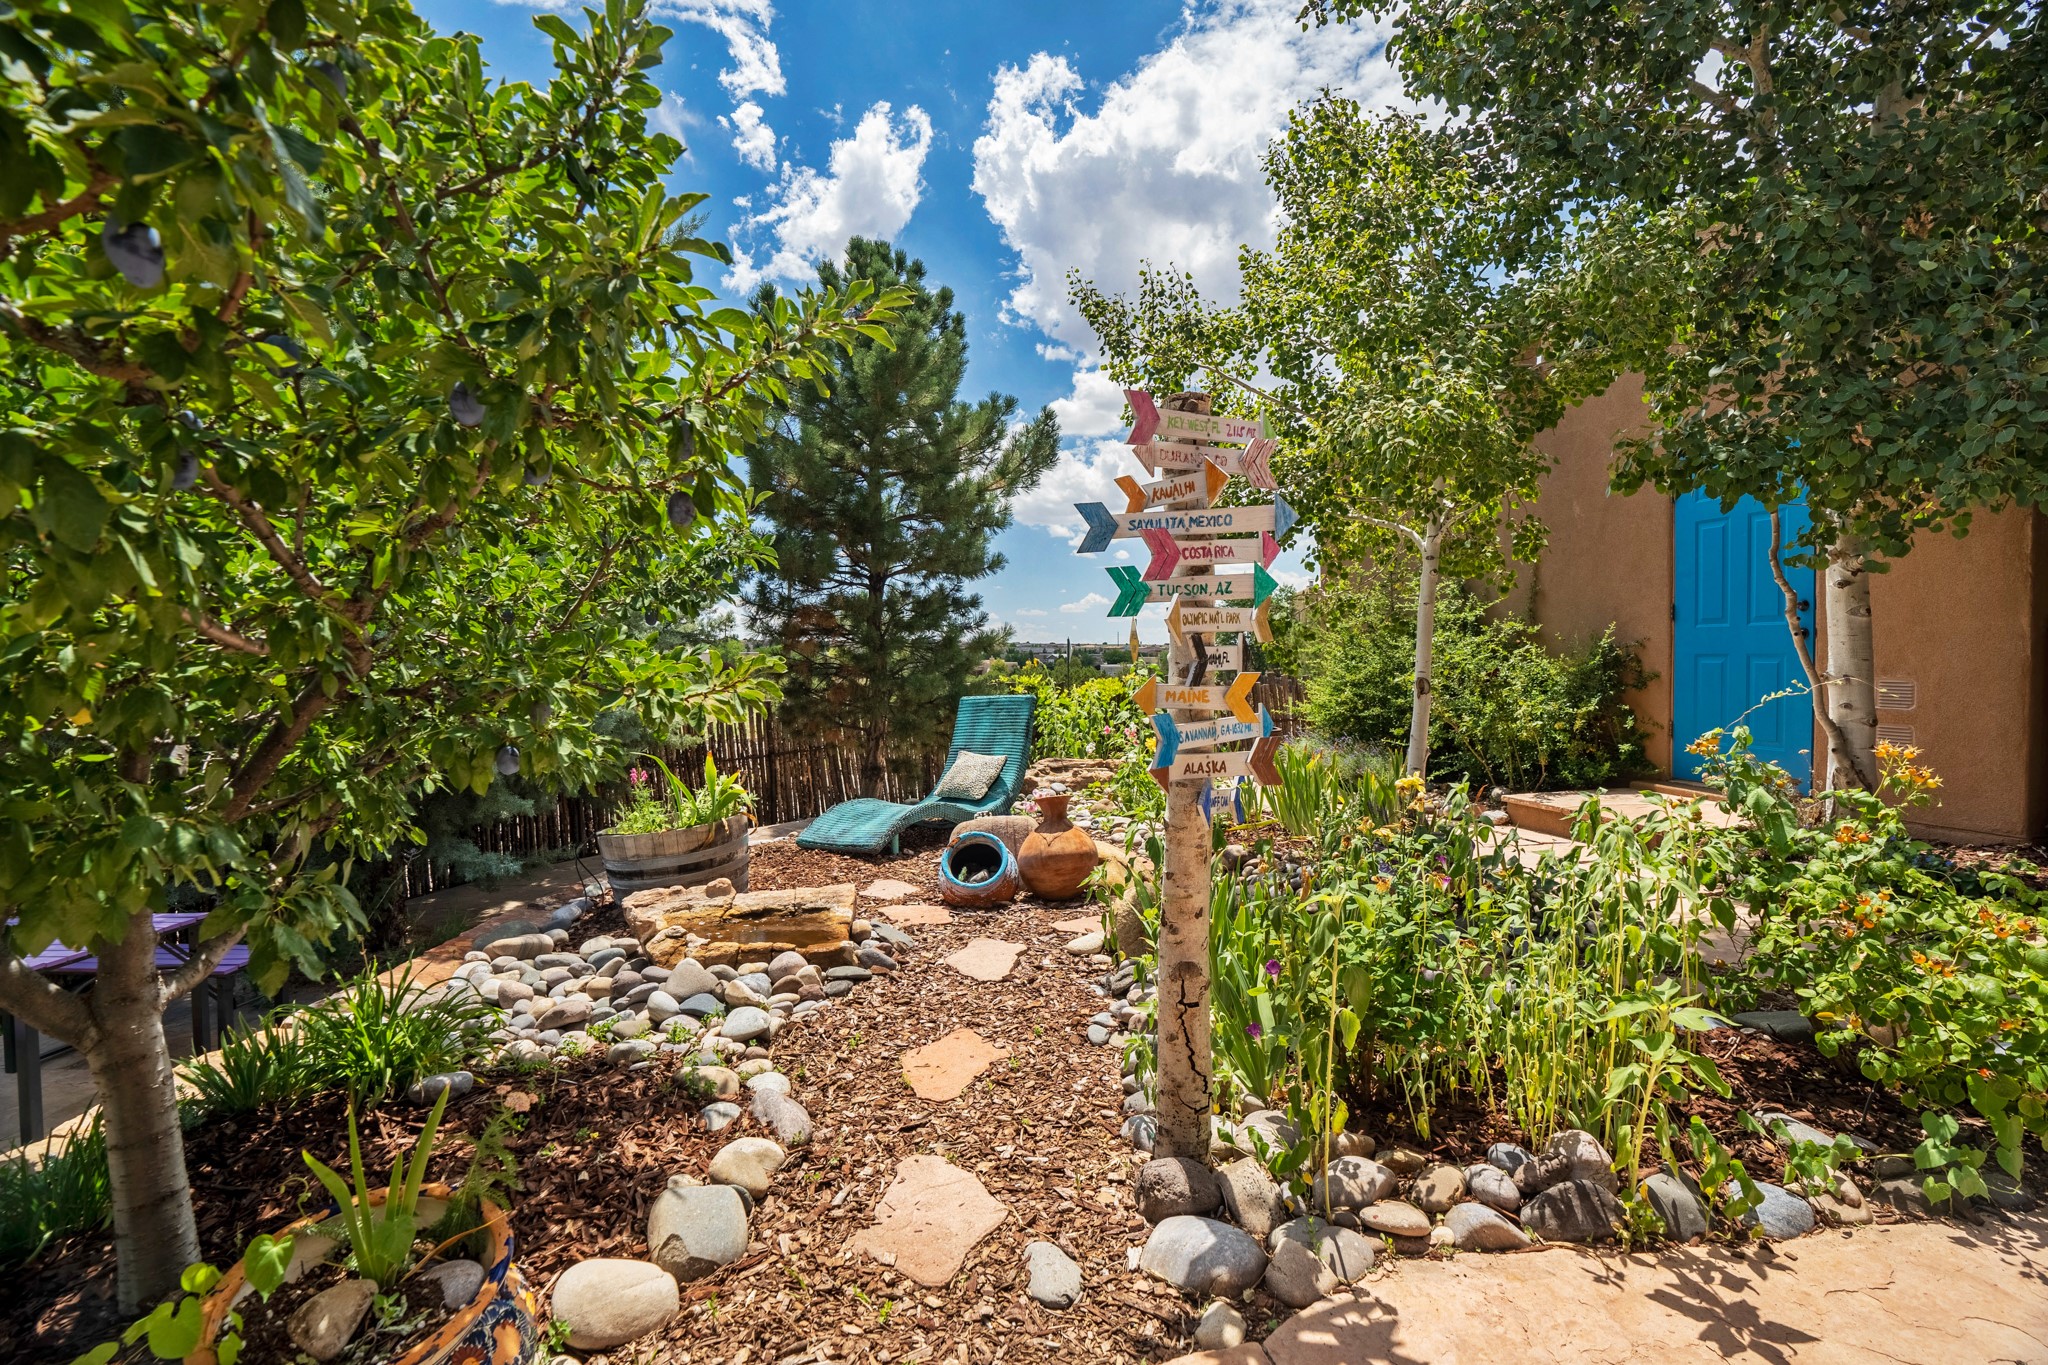 4250 River Song, Santa Fe, New Mexico 87507, 3 Bedrooms Bedrooms, ,2 BathroomsBathrooms,Residential,For Sale,4250 River Song,202232665